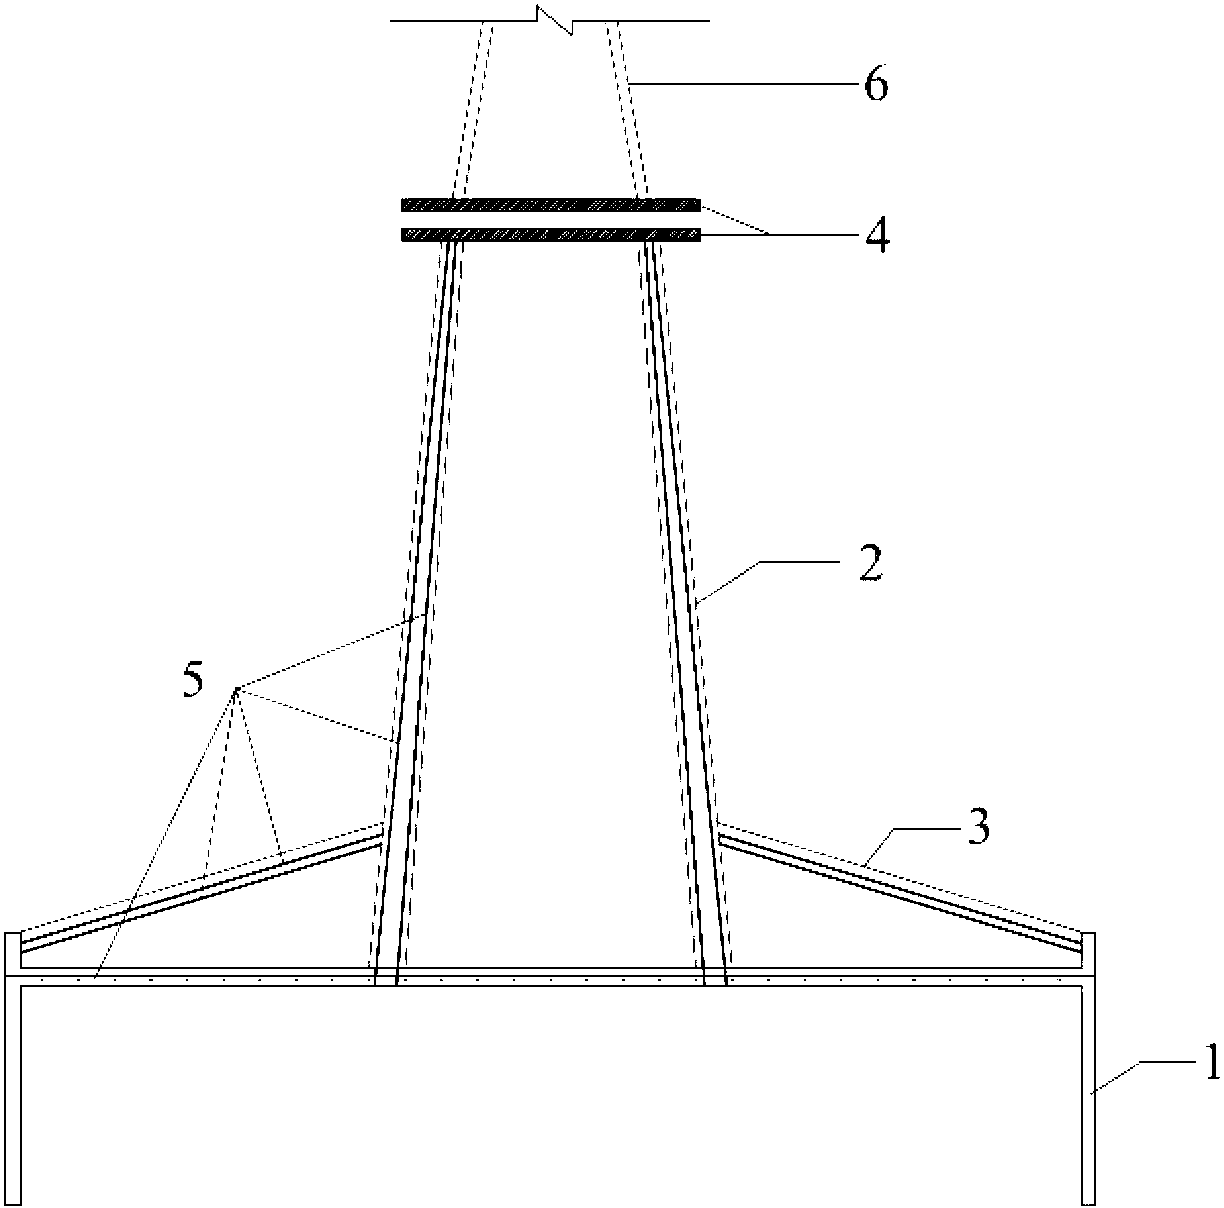 Prestressed concrete cylindrical foundation with oblique supports